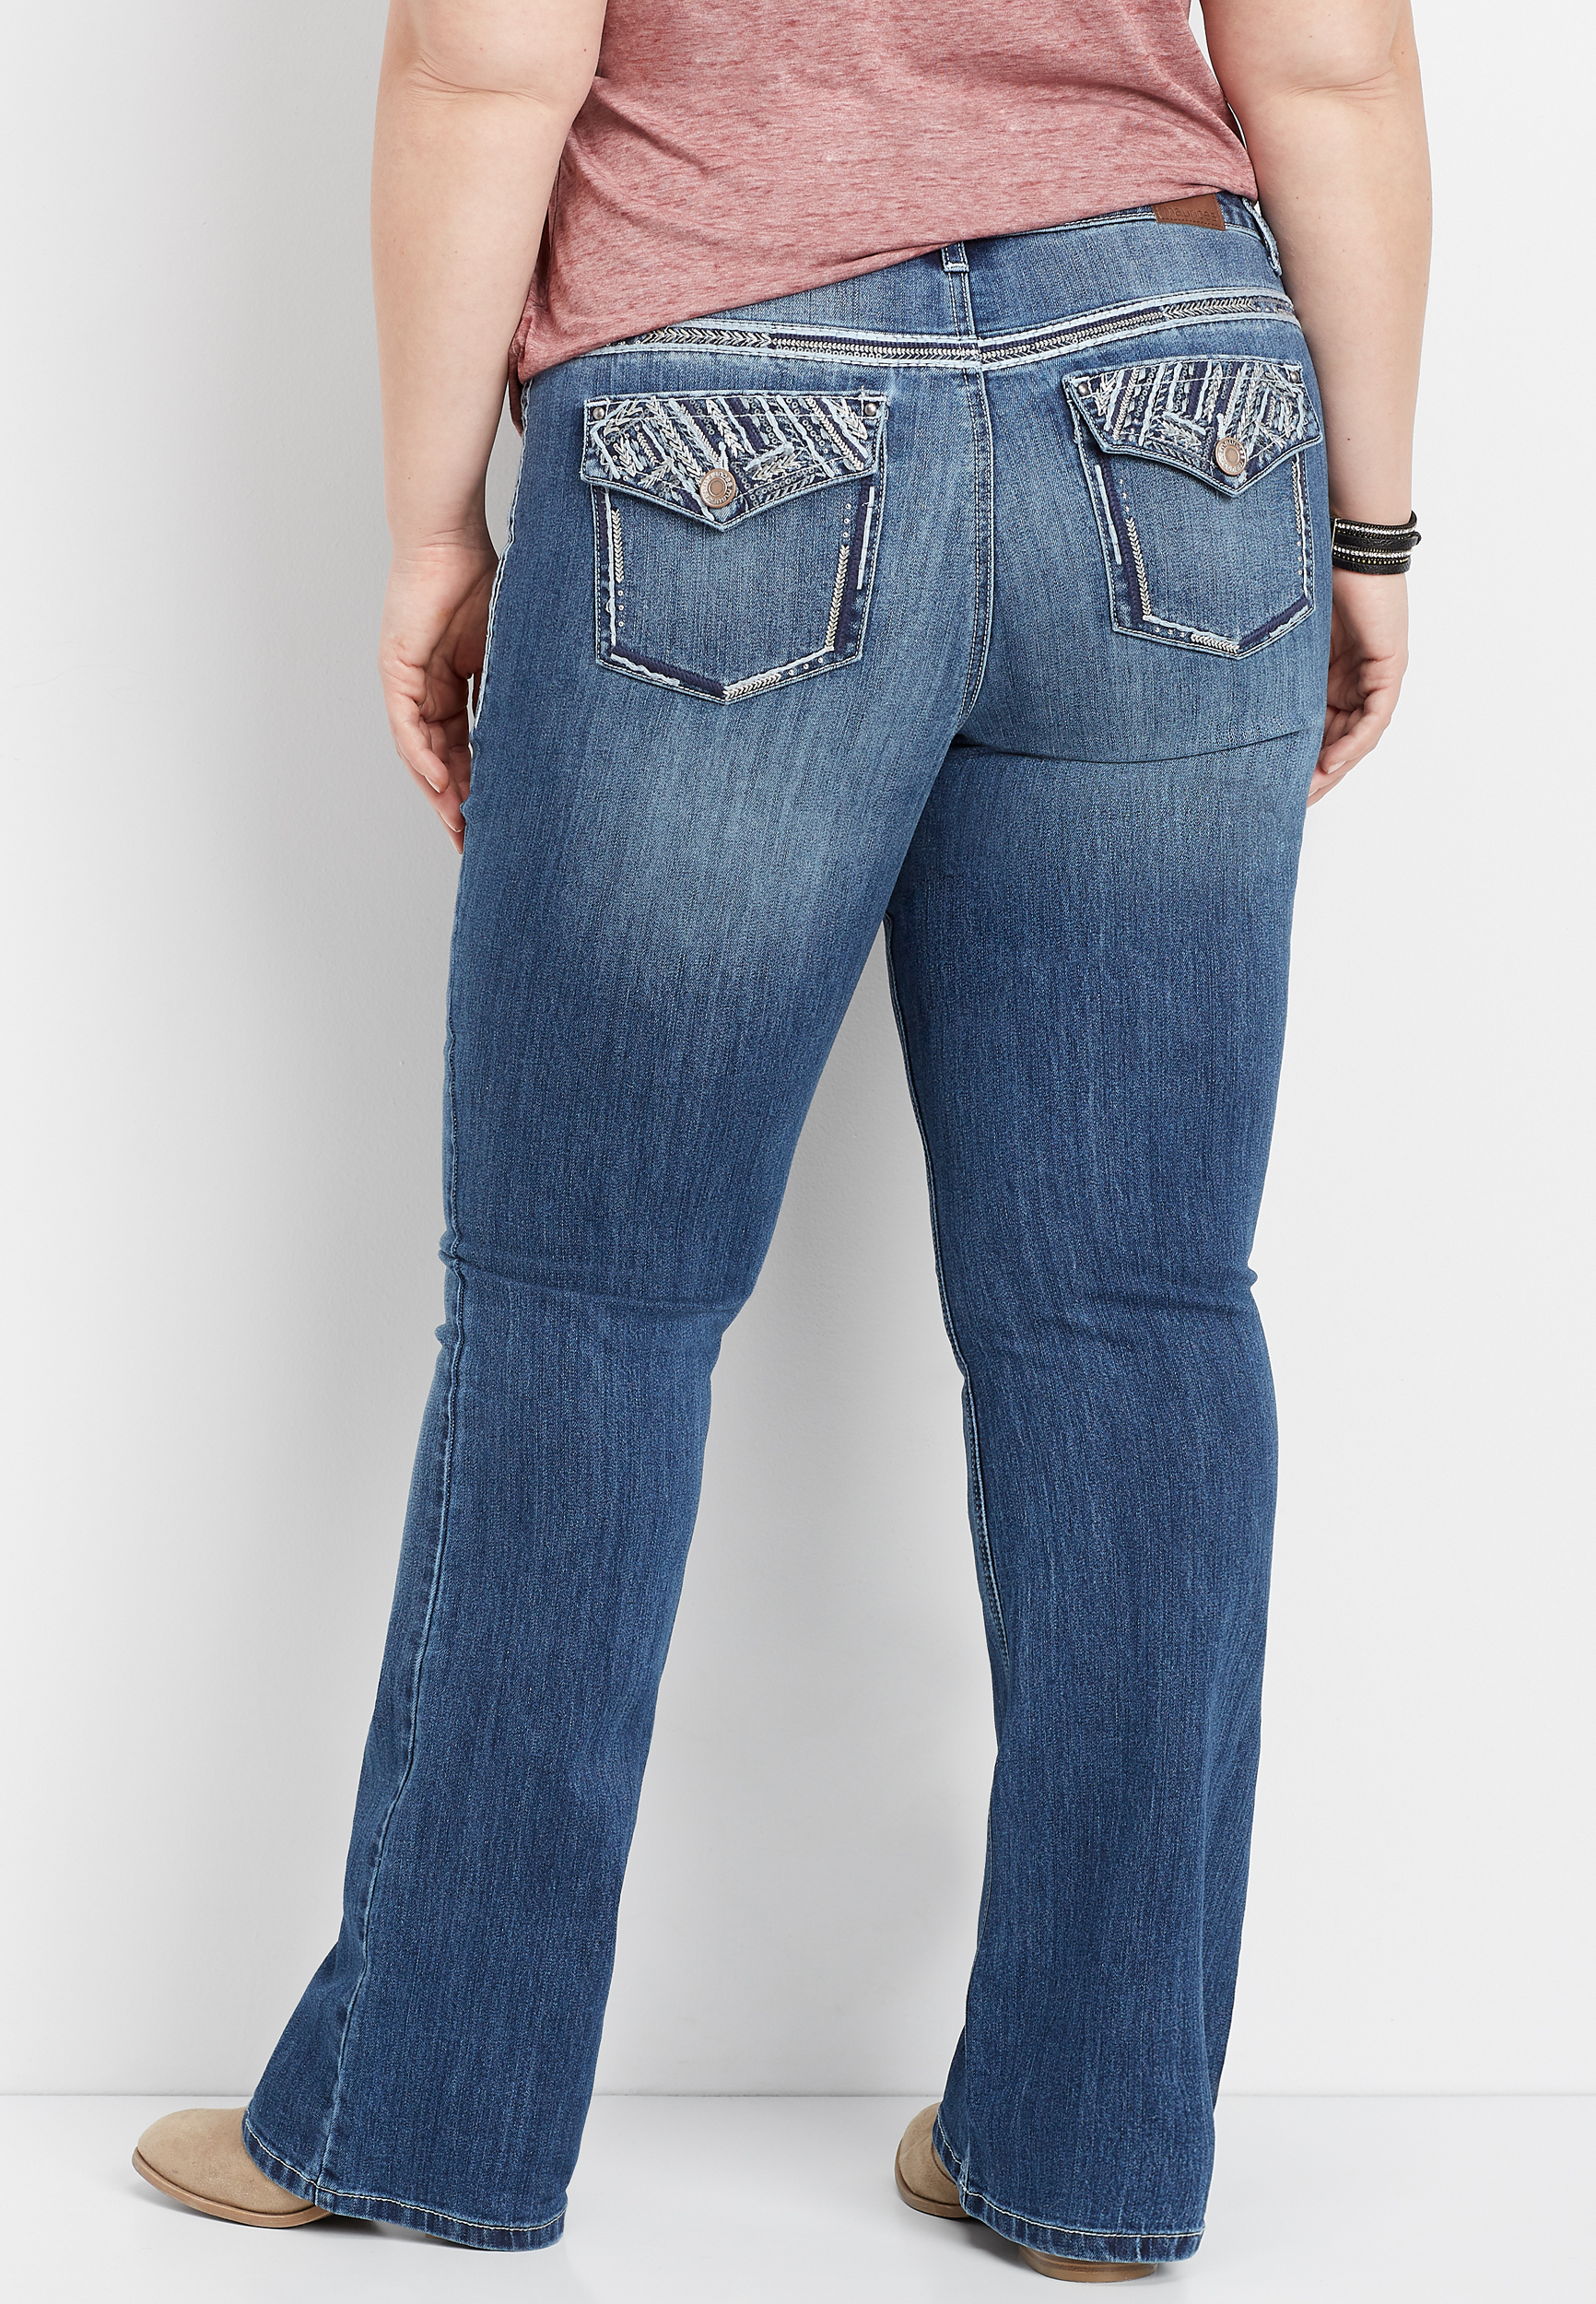 plus size jeans with bling on back pockets